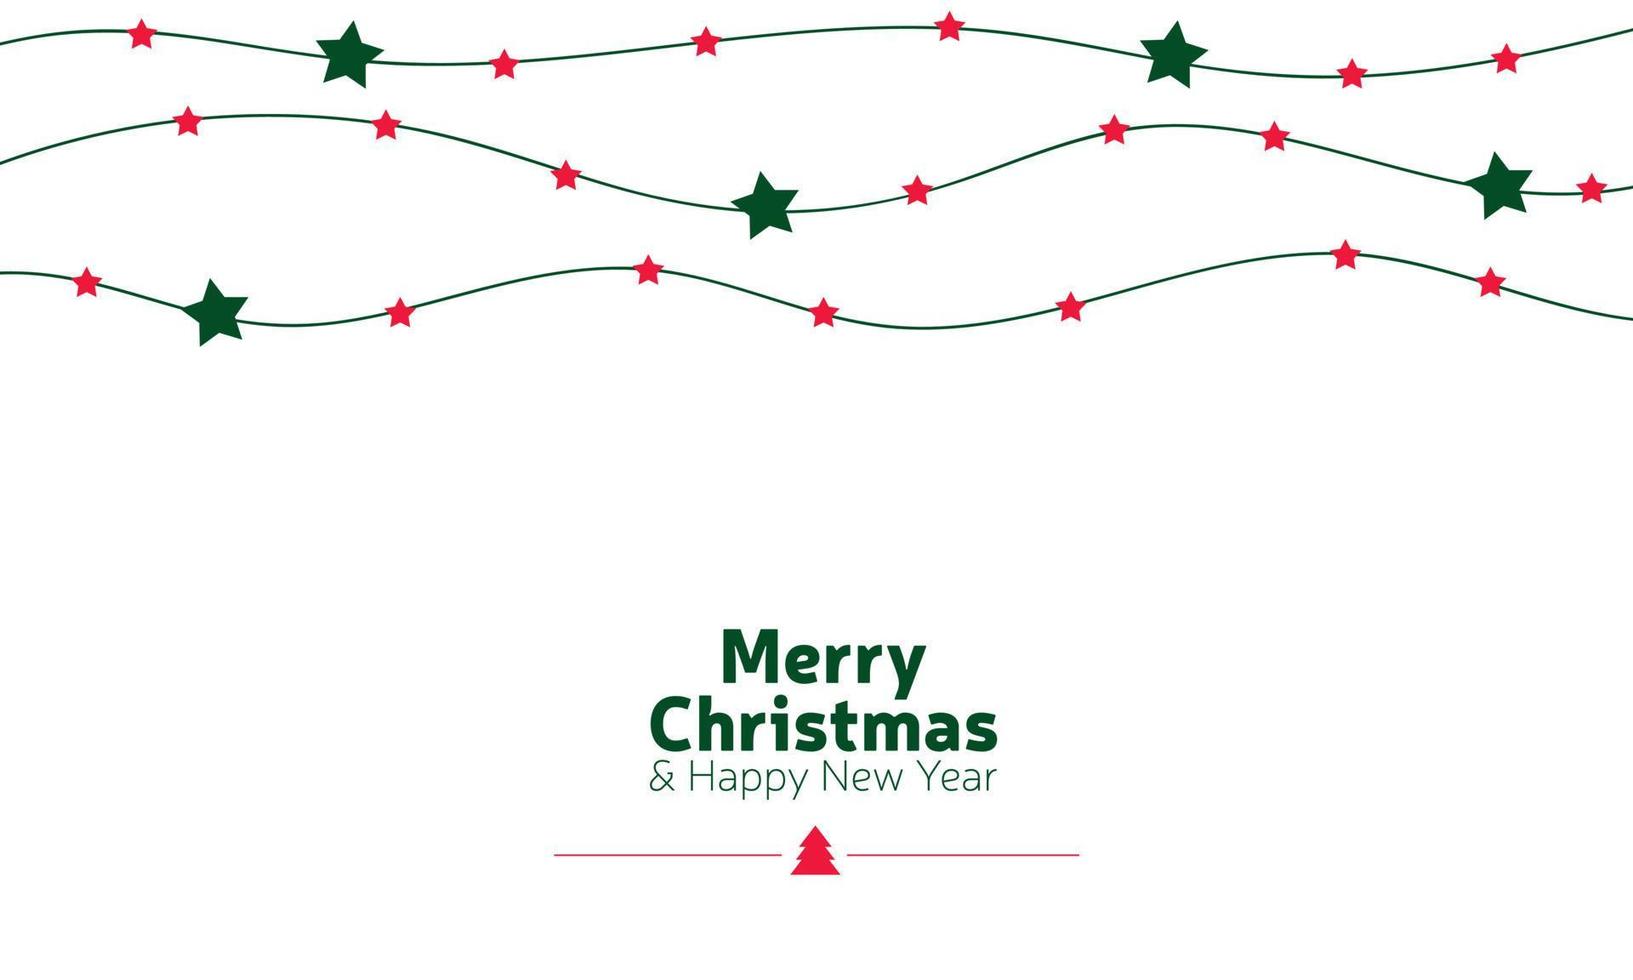 Marry Christmas poster Banner card isolated on simple background vector